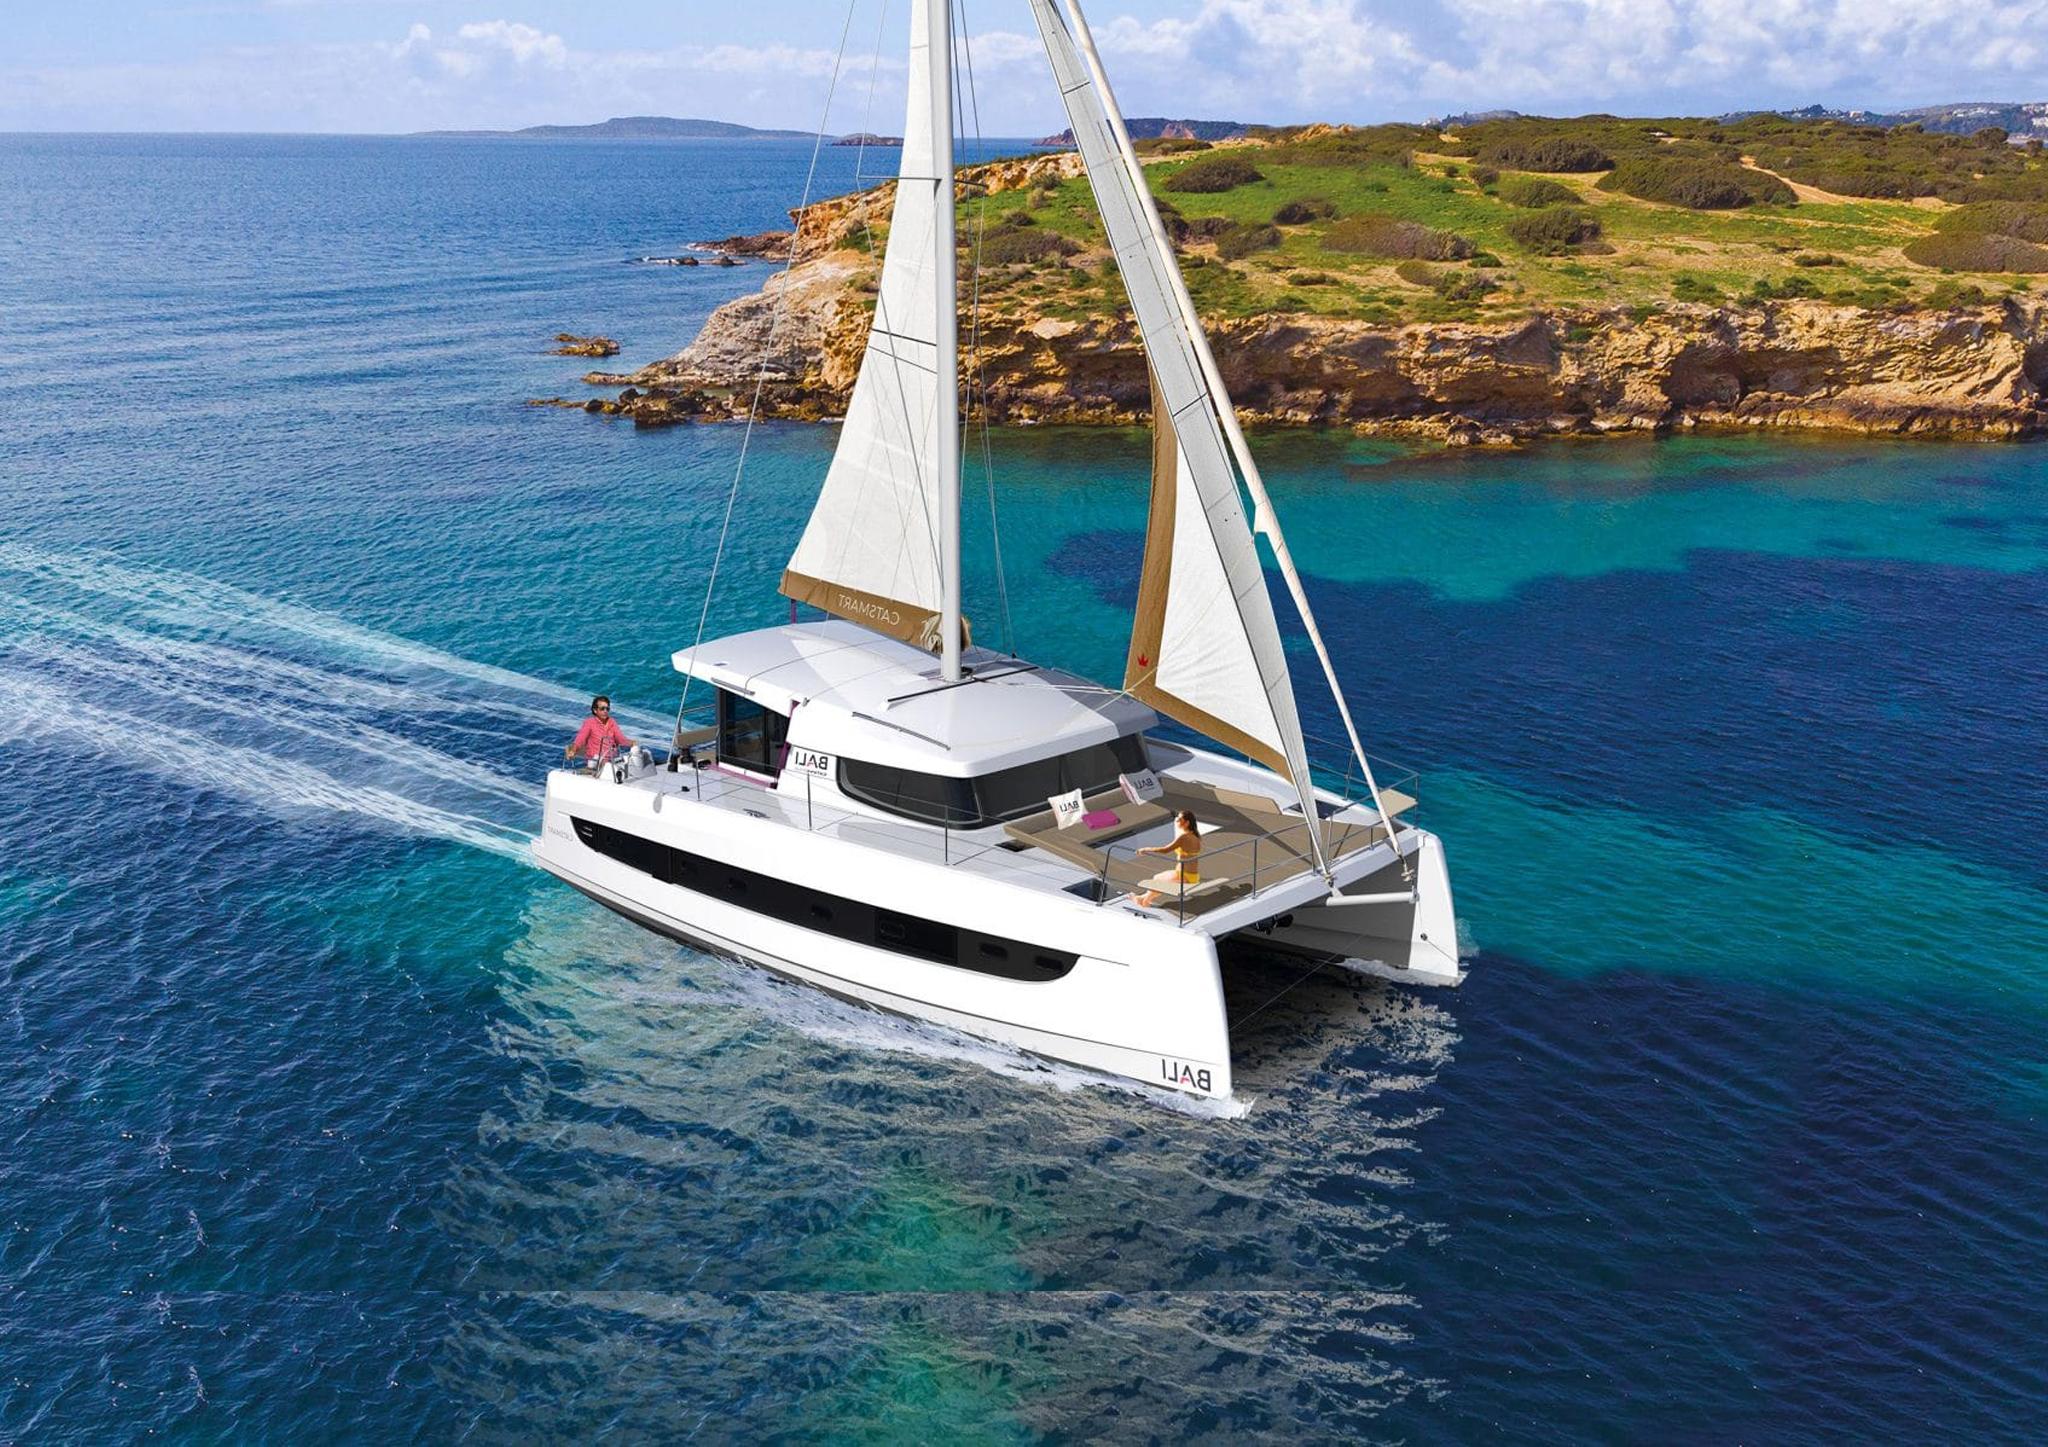 bali catamaran for sale by owner